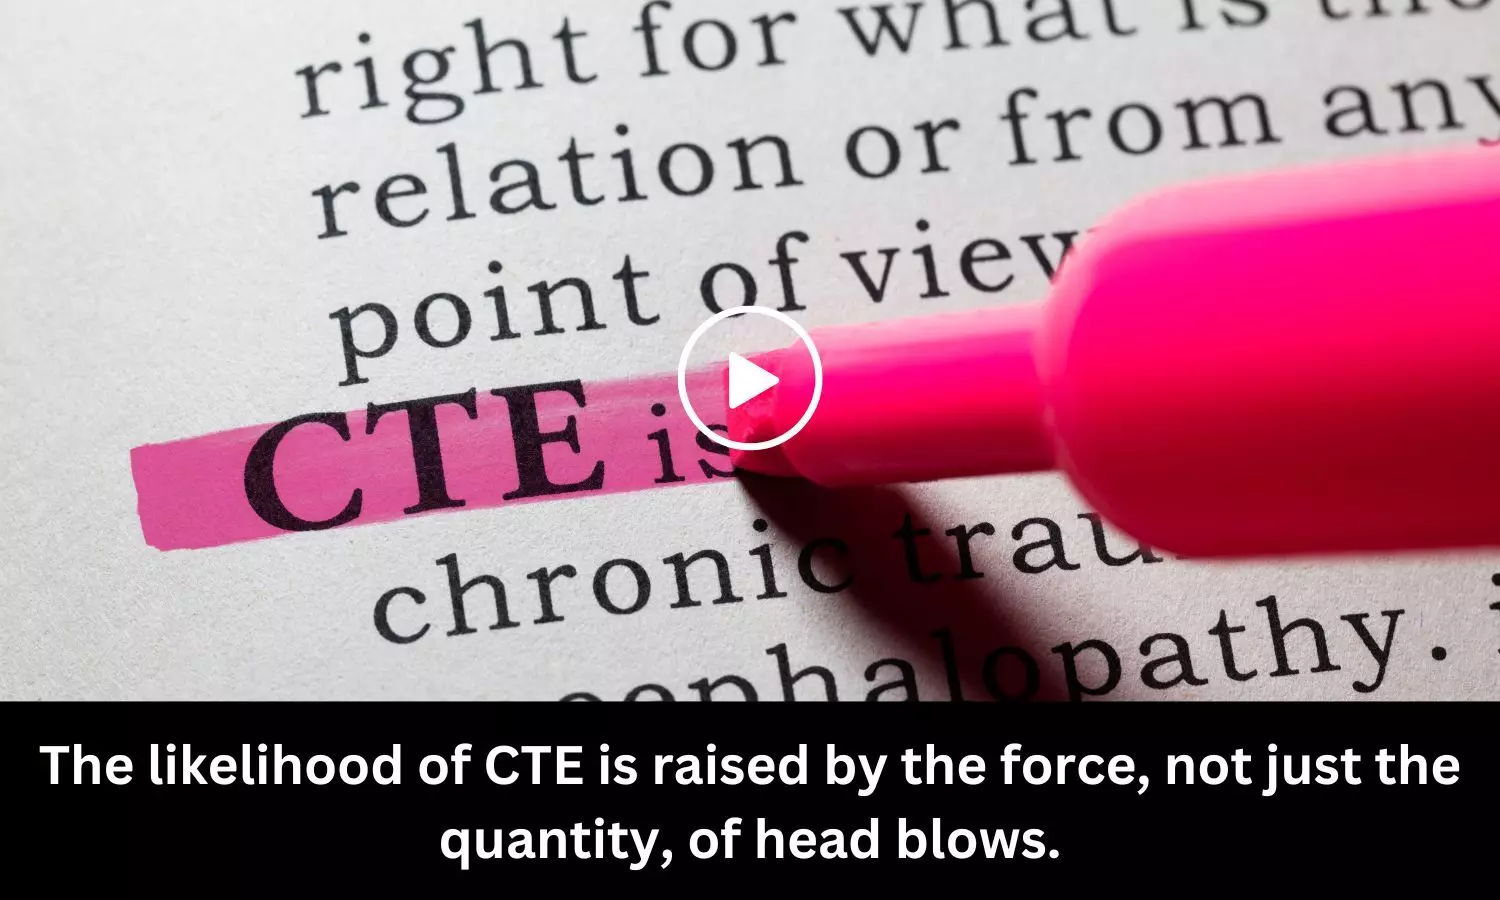 The likelihood of CTE is raised by the force, not just the quantity, of head blows.